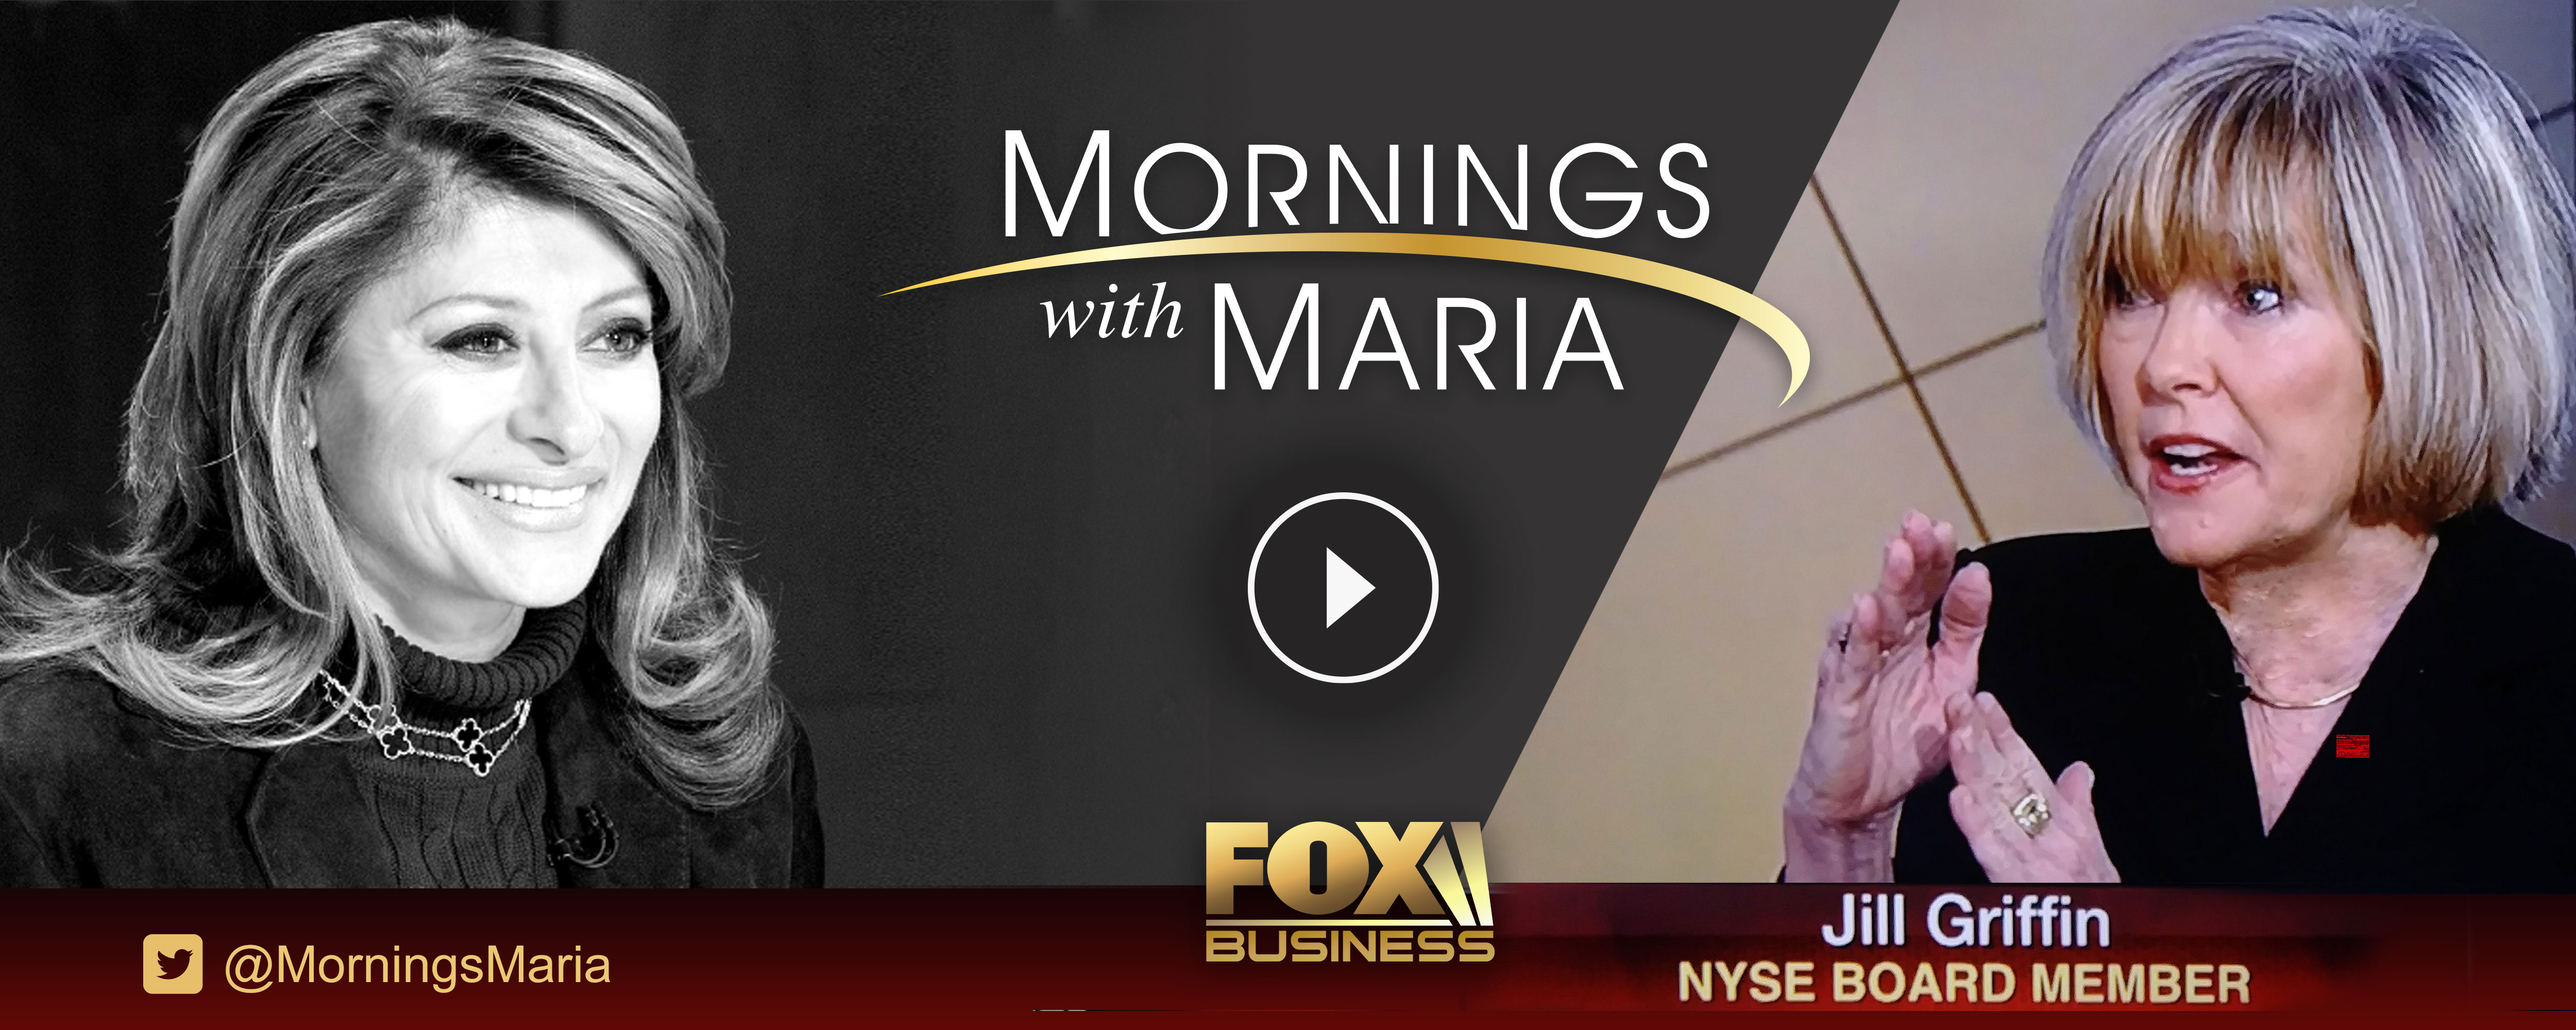 Jill Griffin on Fox Business Mornings with Maria